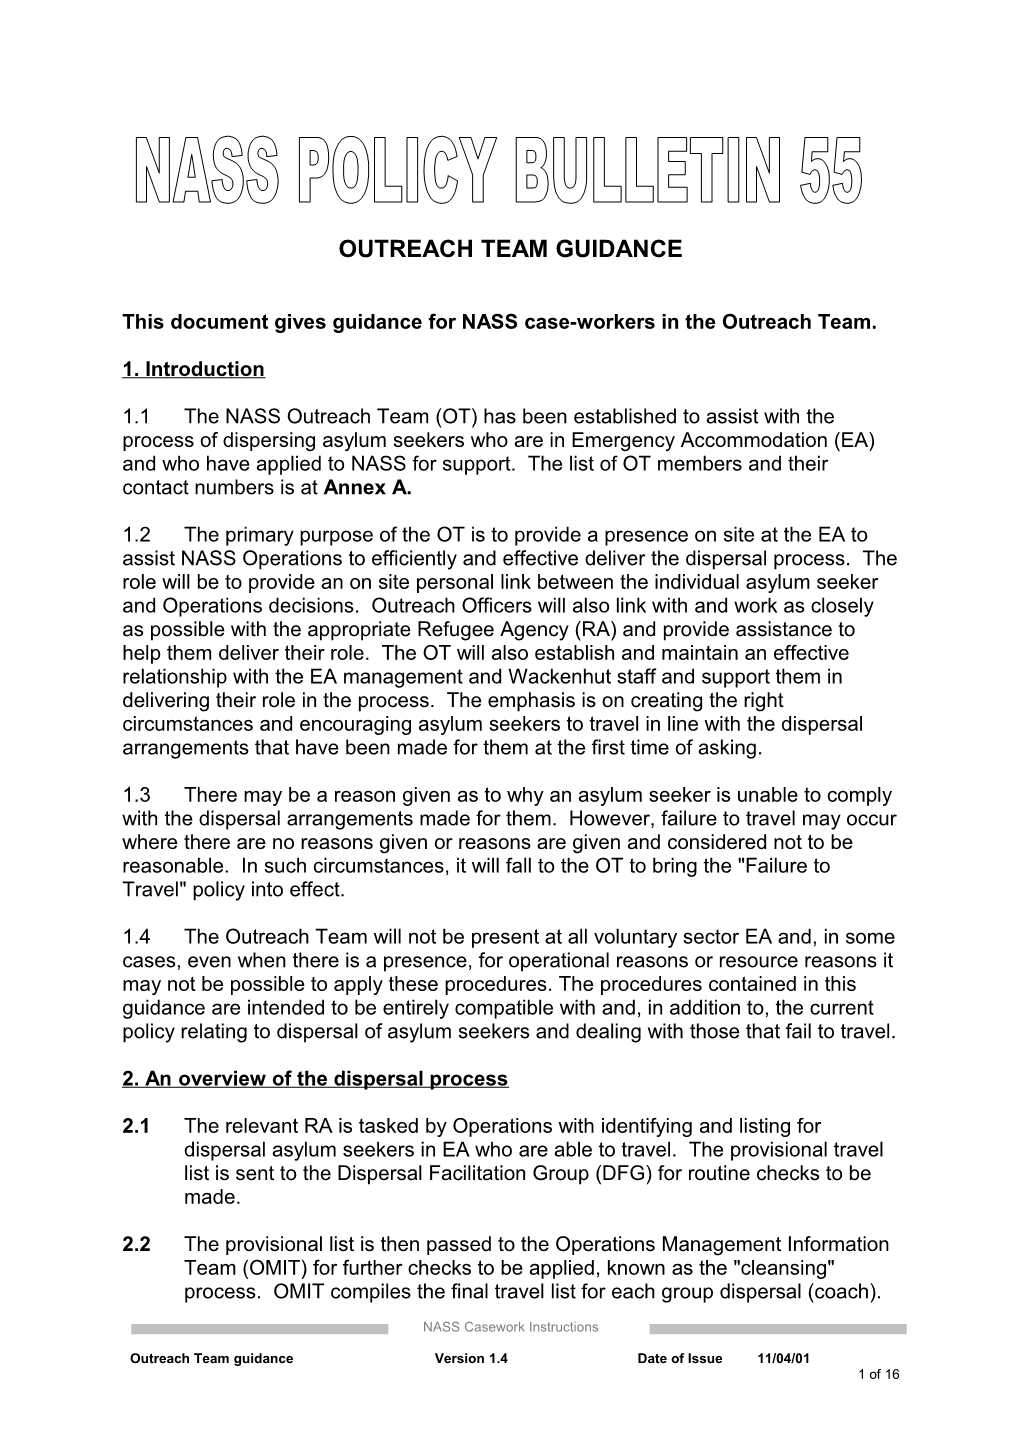 This Document Gives Guidance for NASS Case-Workers in the Outreach Team